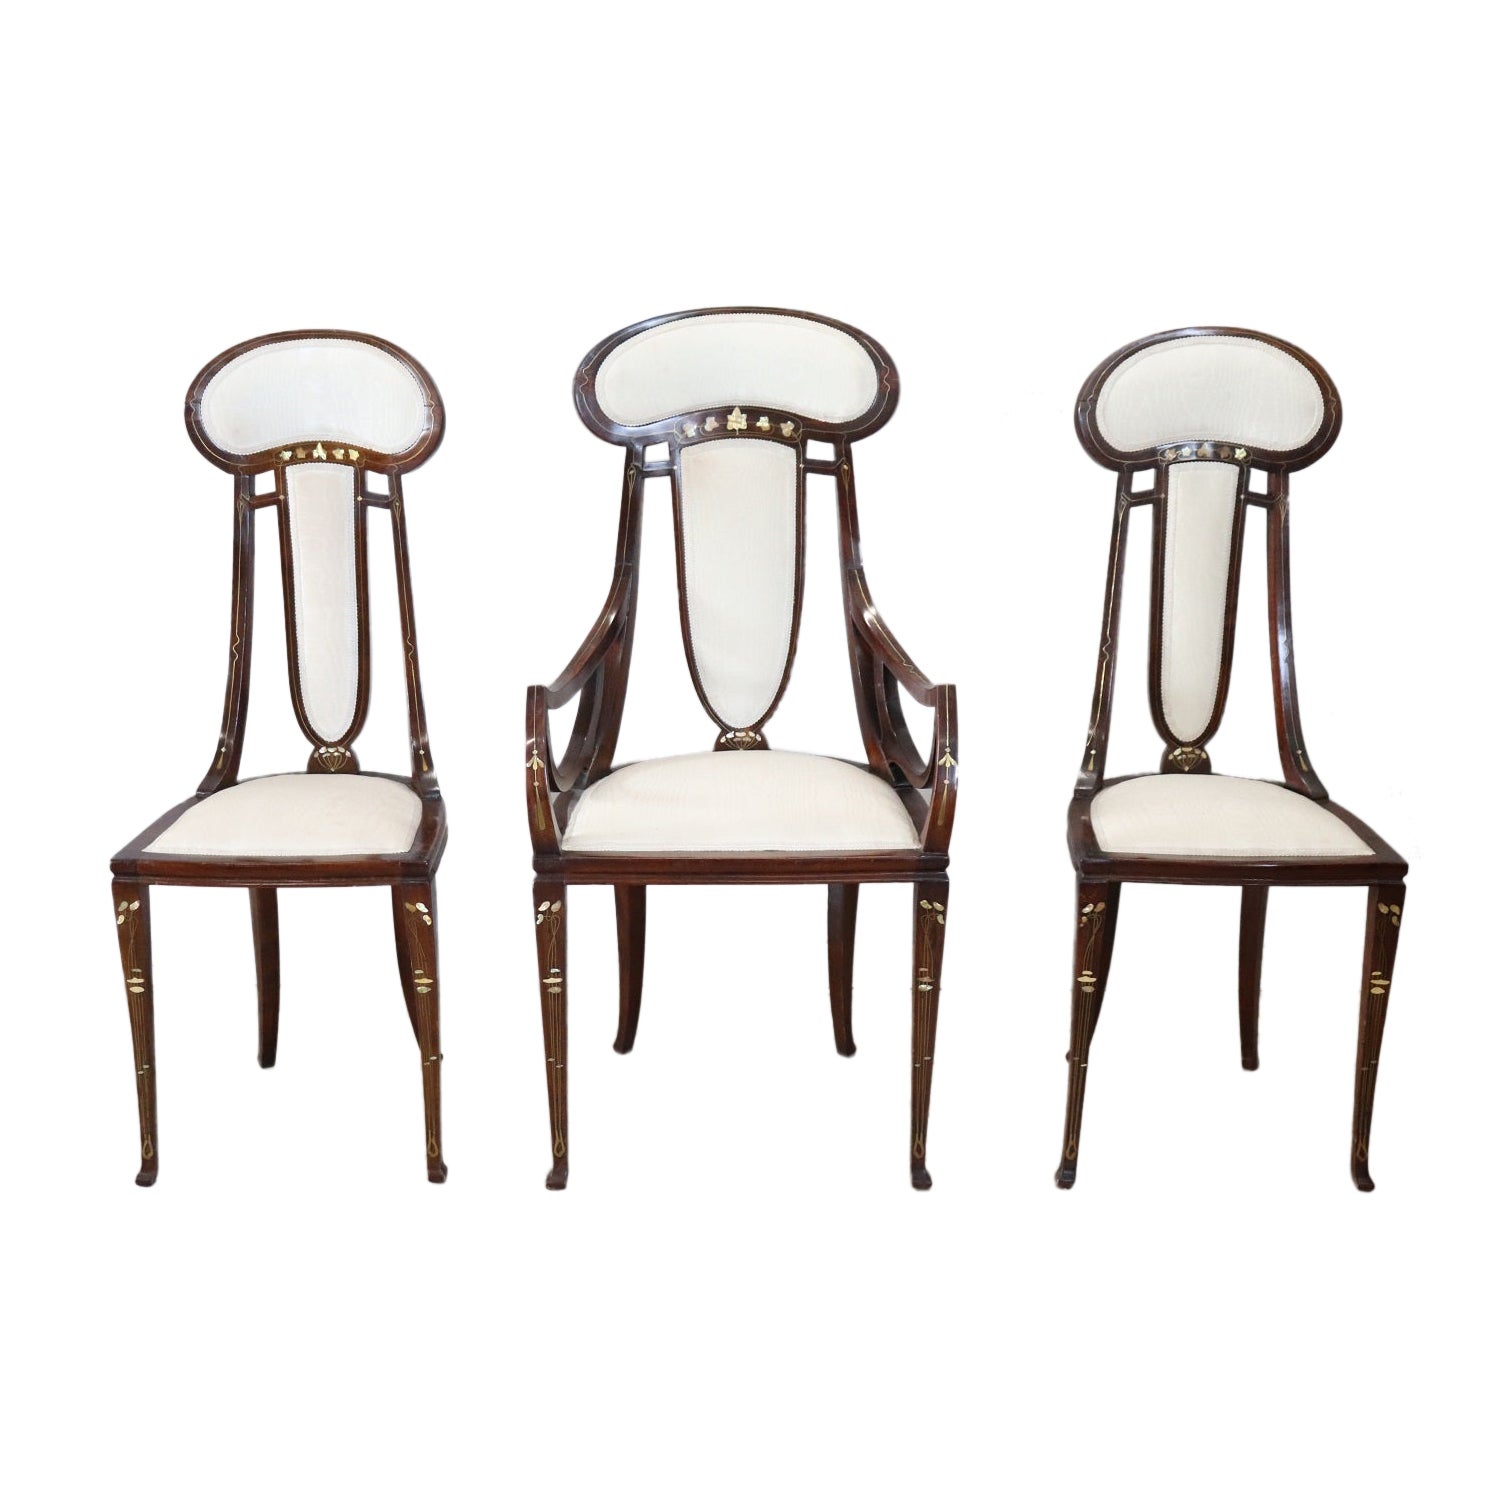 Spectacular Italian Art Nouveau Set of Armchair and 2 Chiars by Carlo Zen 1902s For Sale